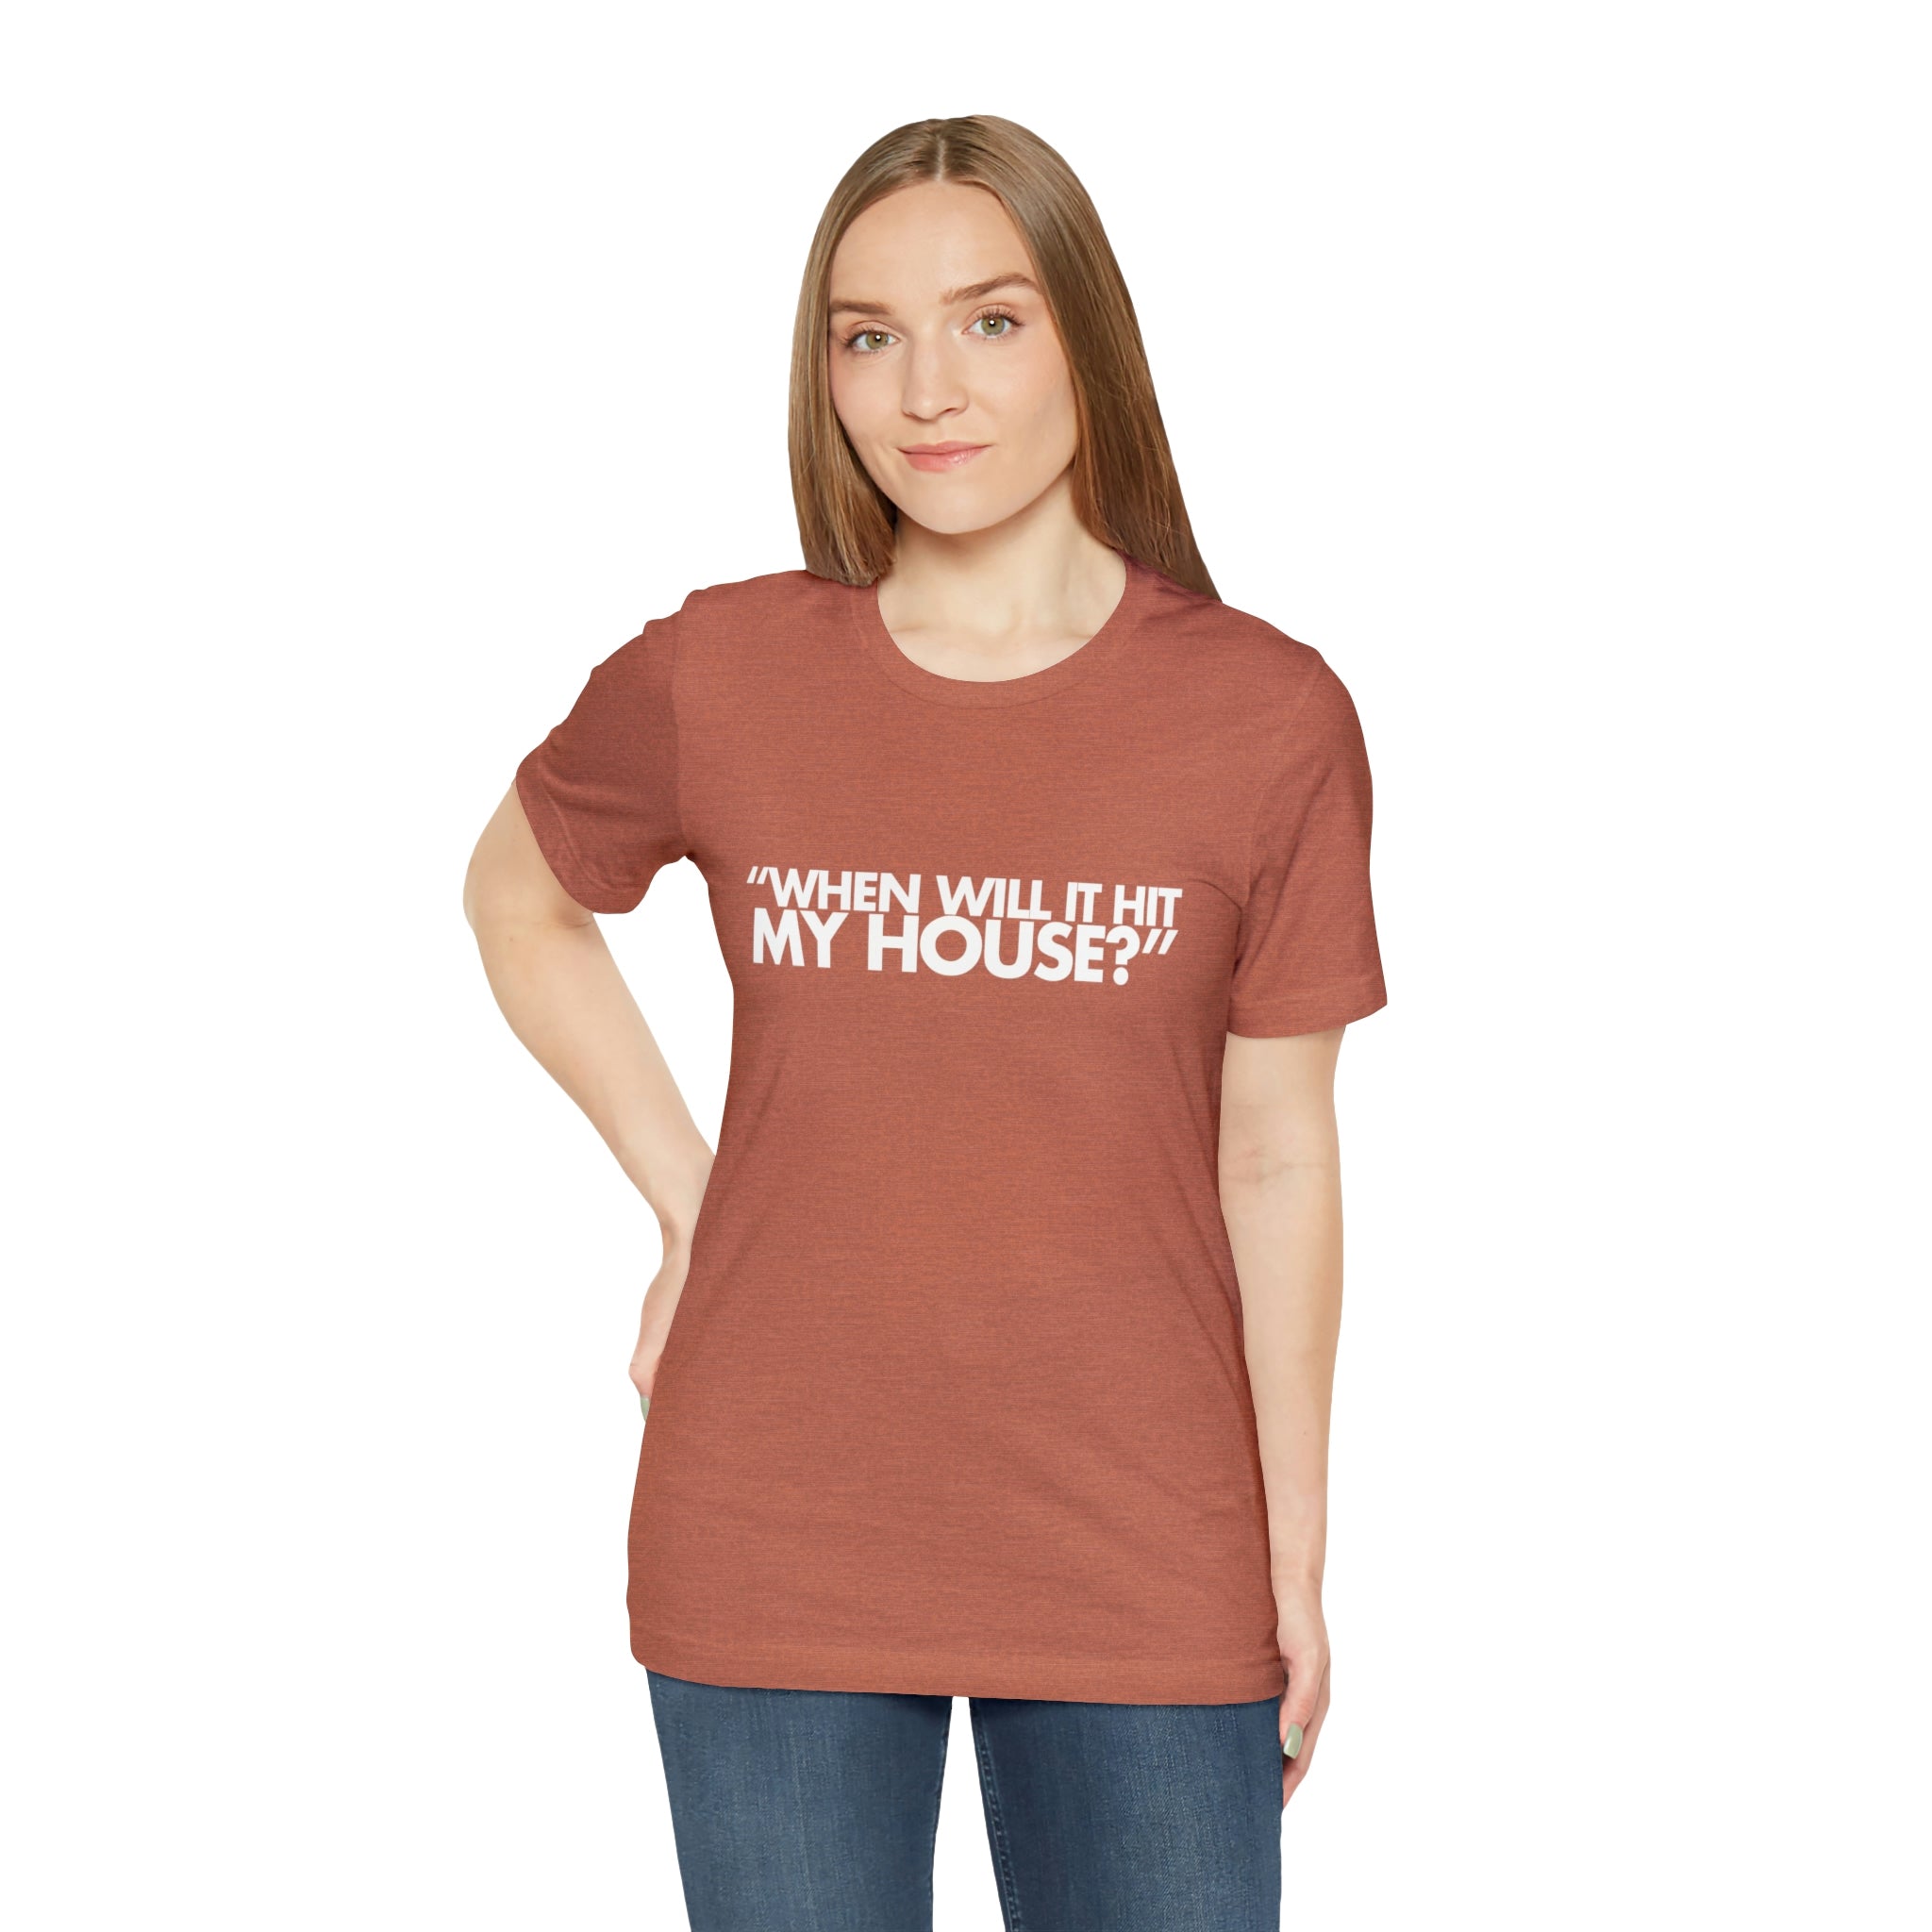 When will it hit my house? Tee 